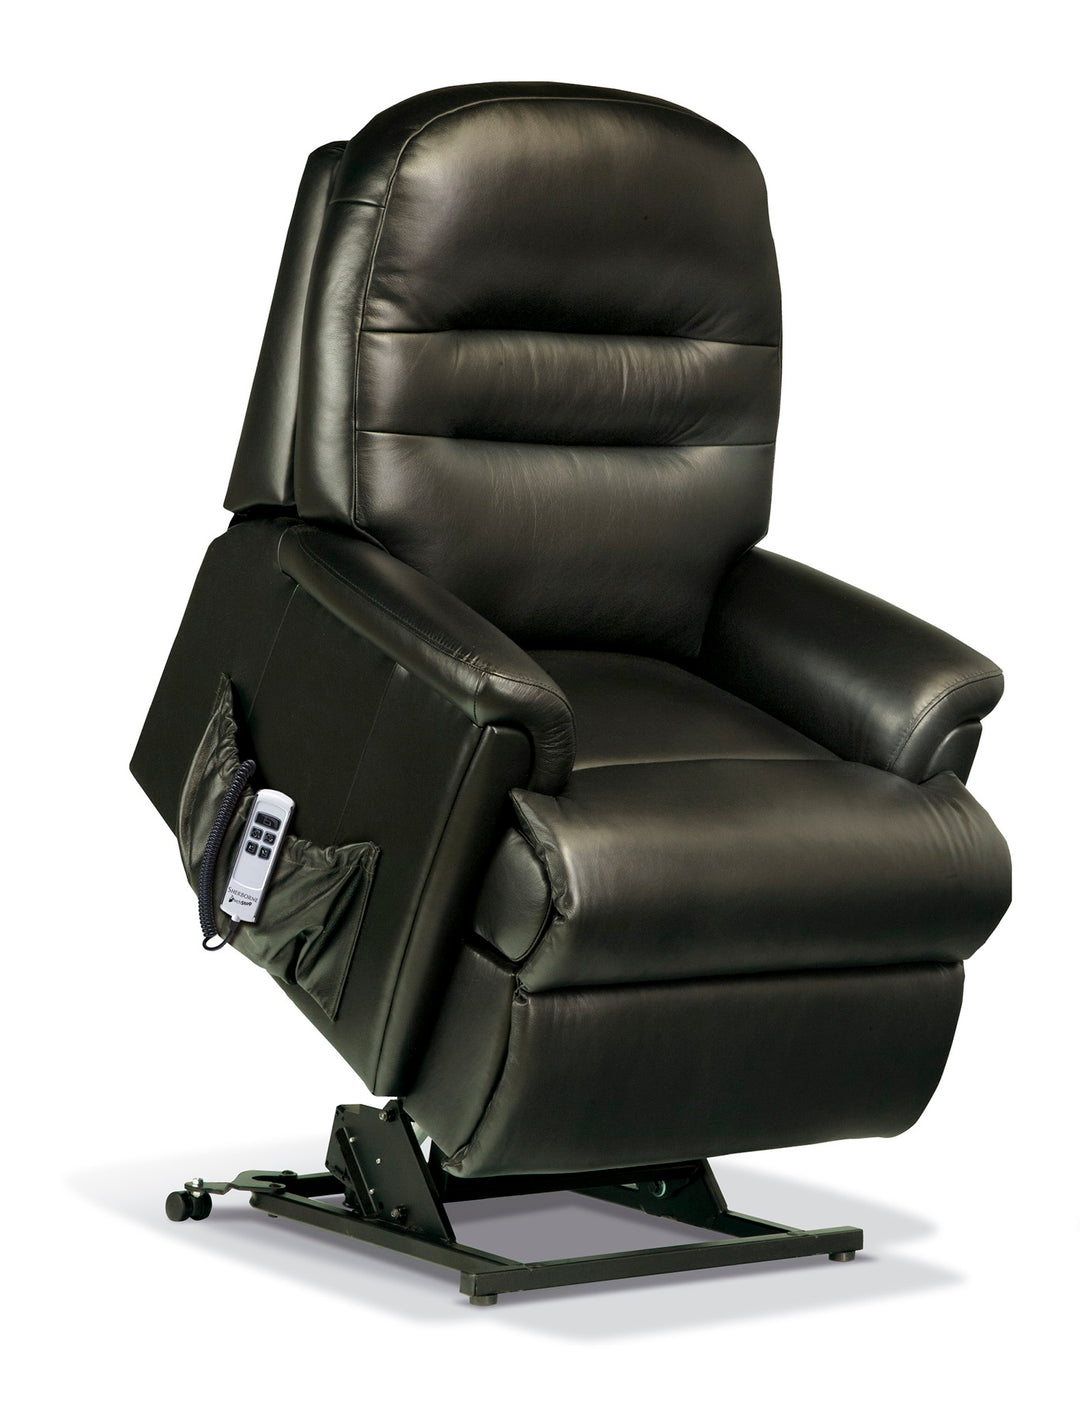 Amberley Recliner Chair Collection